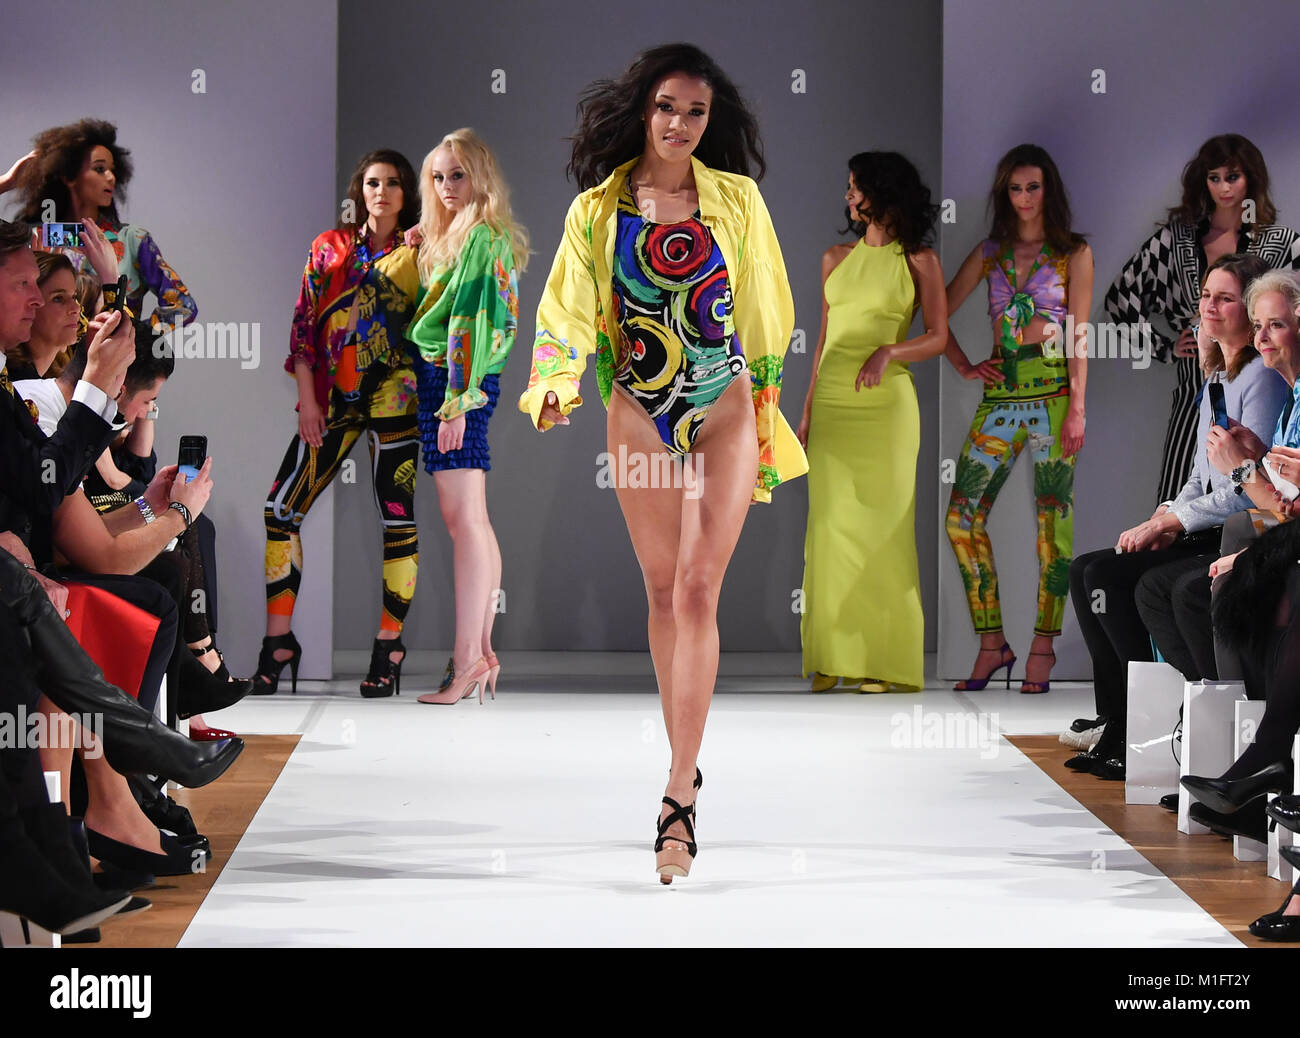 Gianni Versace Fashion Show High Resolution Stock Photography and Images -  Alamy